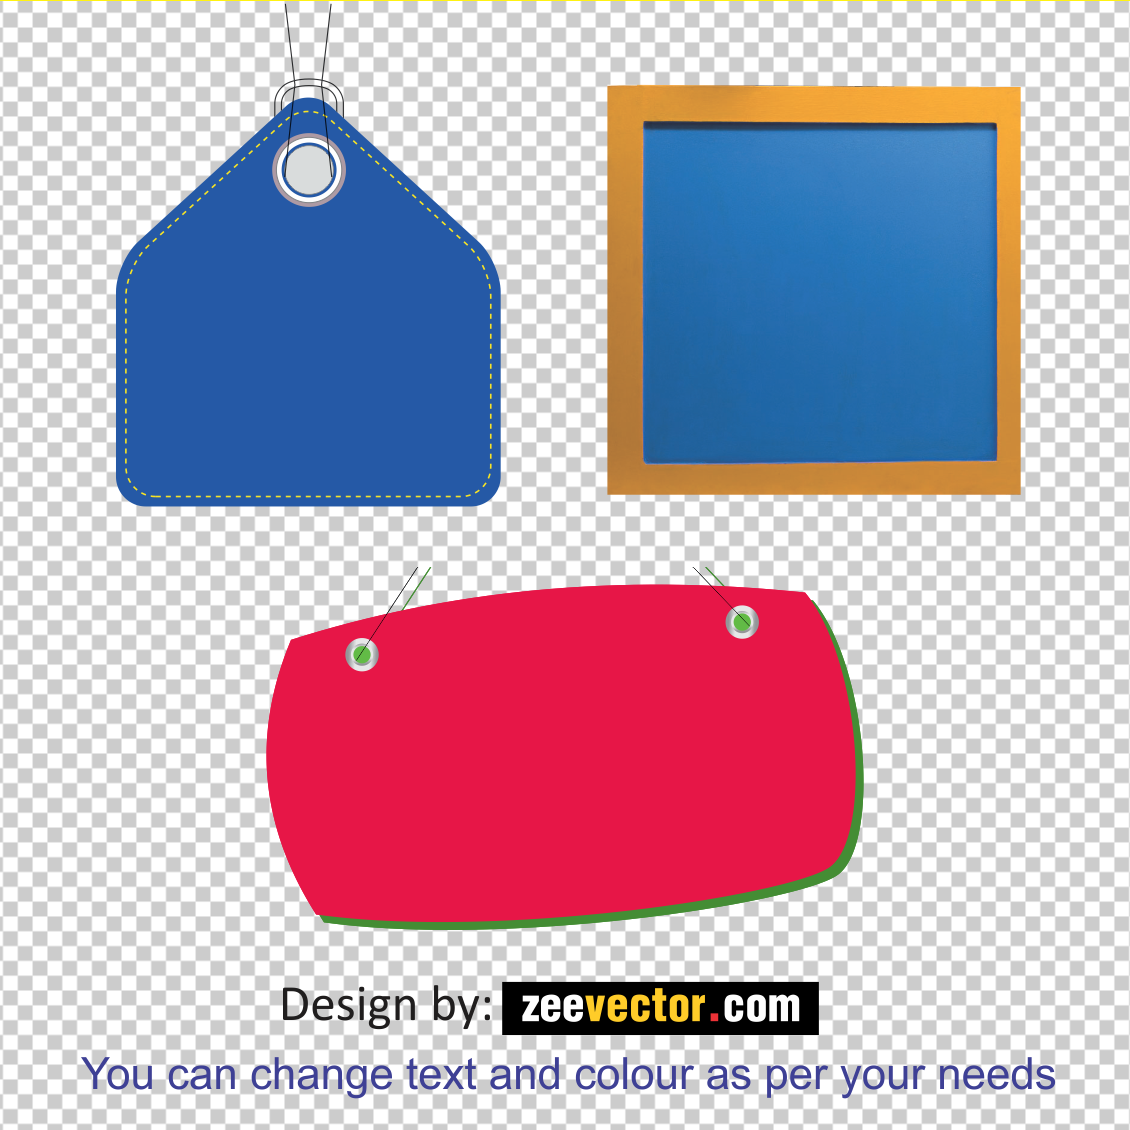 Price Tag Vector Free Download - FREE Vector Design - Cdr, Ai, EPS, PNG, SVG